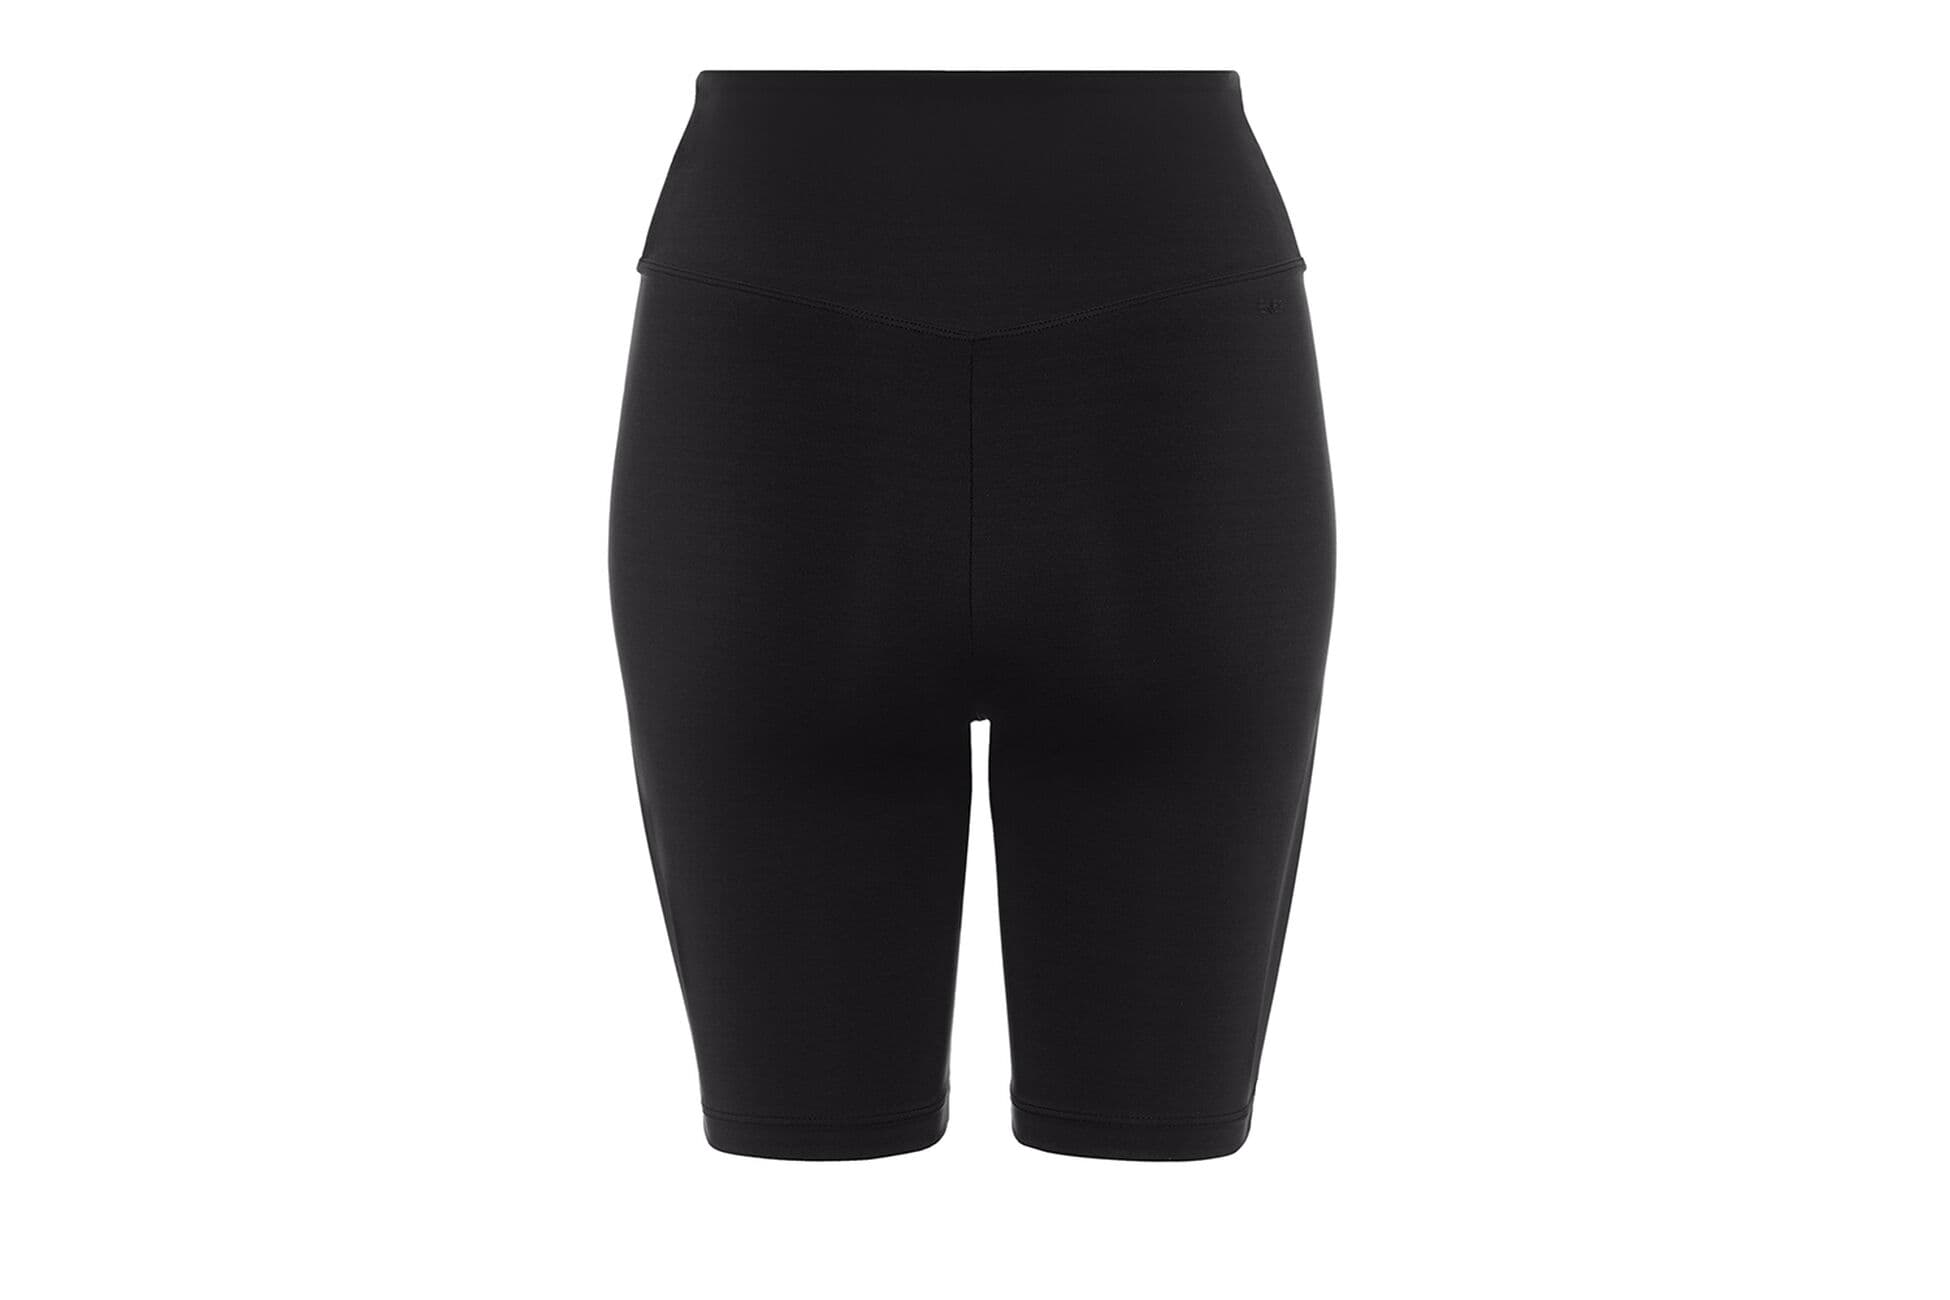 Jeannie Cycling shorts standard view �